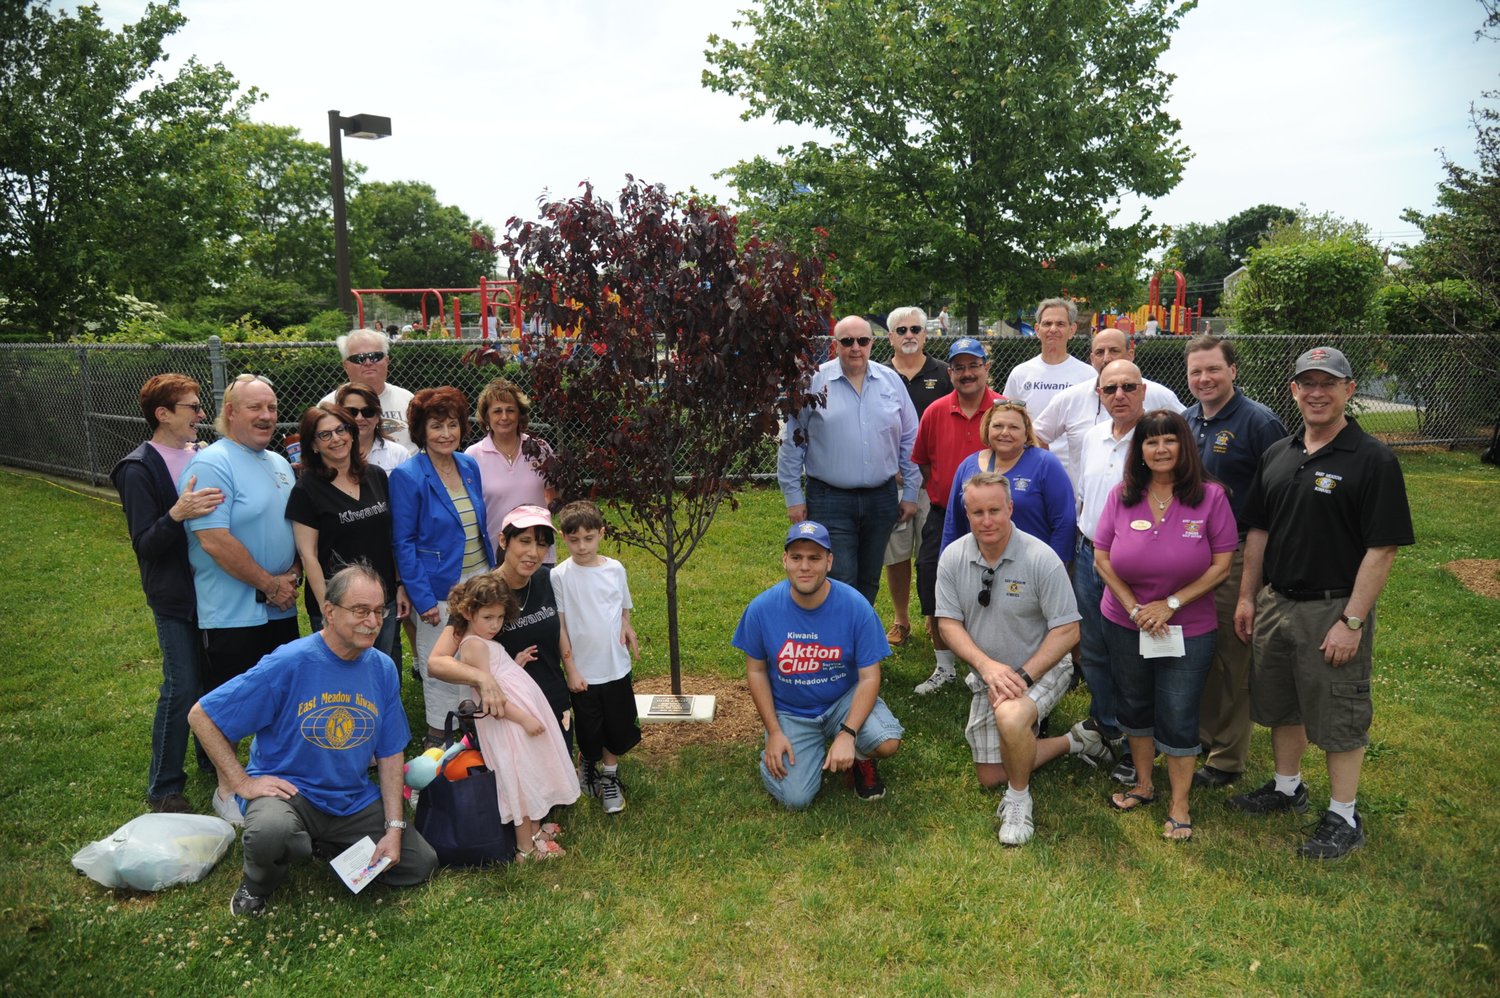 East Meadow Kiwanis has hosted tree dedication ceremonies before, but at this year’s East Meadow Community Pride Day, trees are also dedicated to neighbors who died from complications related to Covid-19.